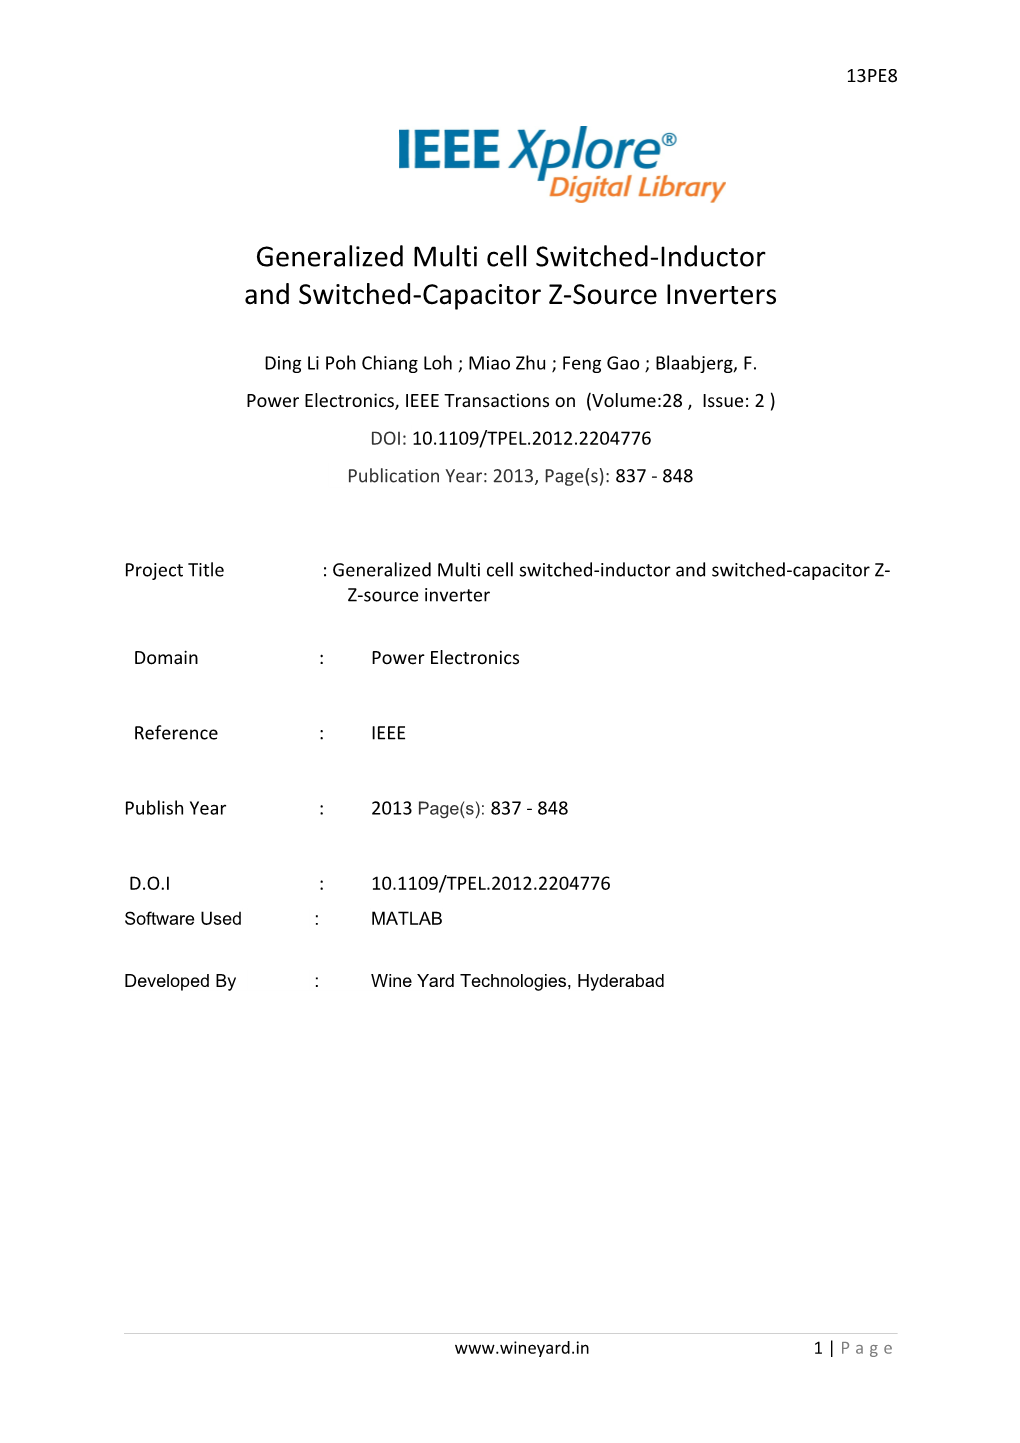 Generalized Multi Cell Switched-Inductor